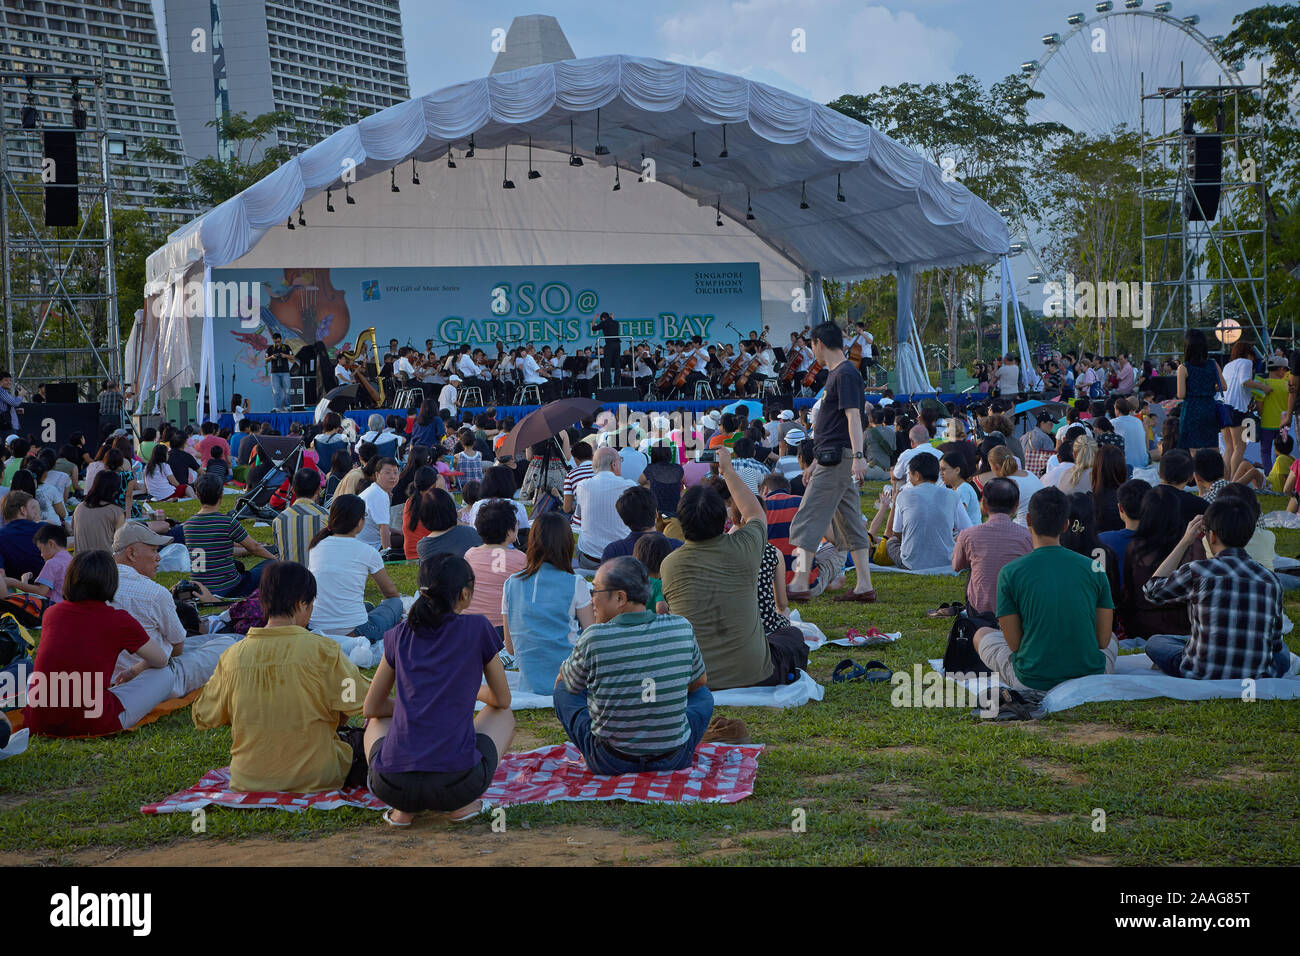 SINGAPORE - JULY 21, 2012: Concert in the Park in Singapore on July 21, 2012. Stock Photo